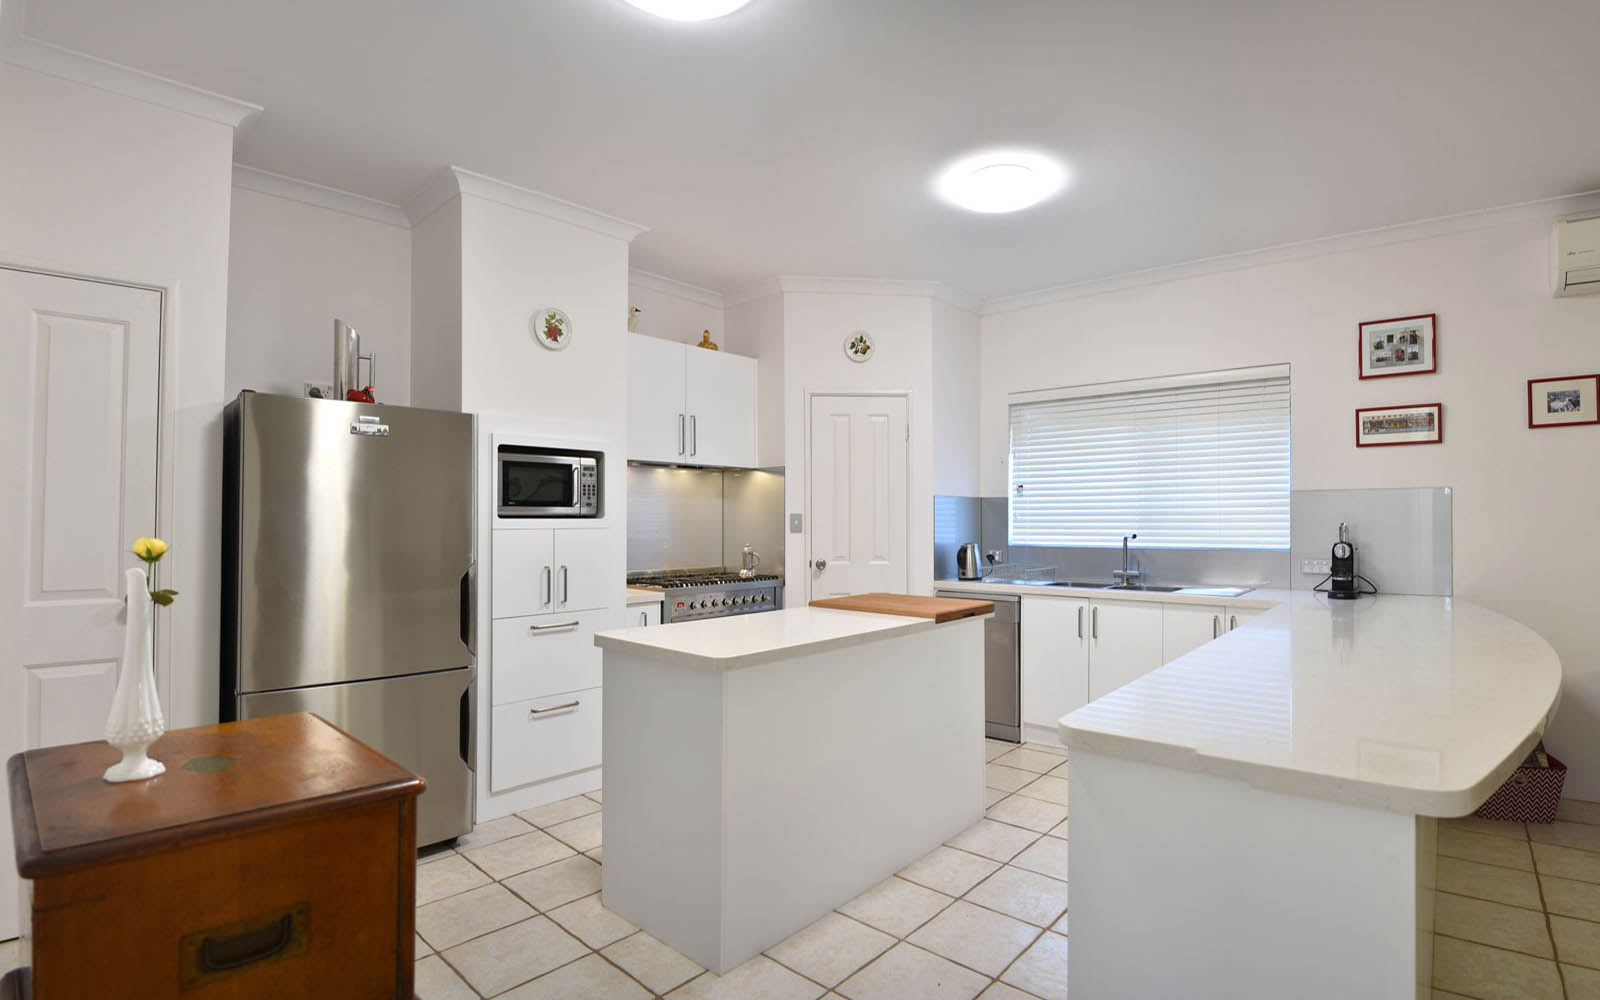 Kitchen Renovation Perth Before After